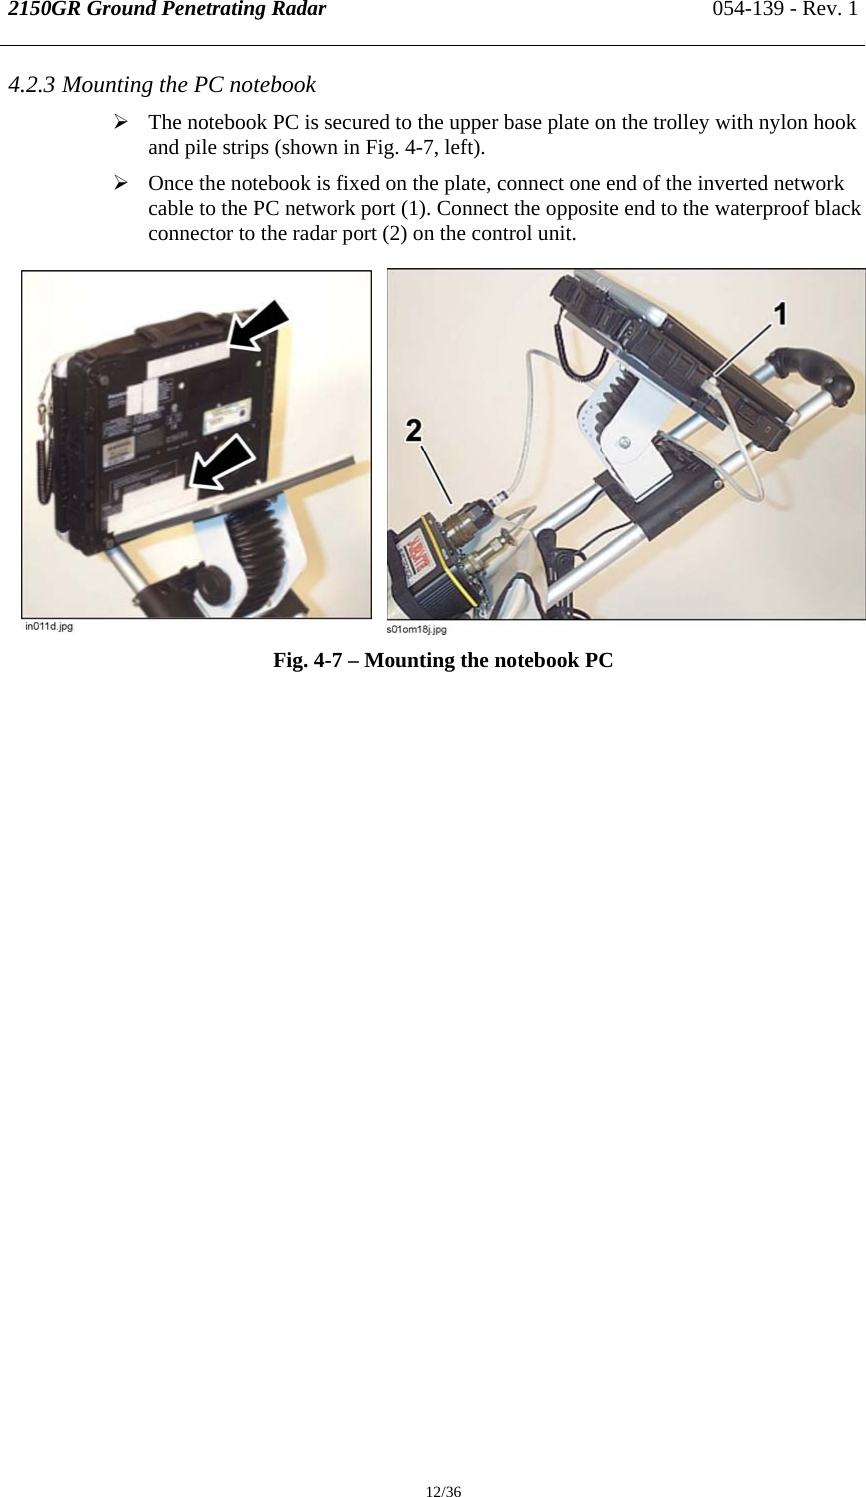 2150GR Ground Penetrating Radar 054-139 - Rev. 1  12/36 4.2.3 Mounting the PC notebook ¾ The notebook PC is secured to the upper base plate on the trolley with nylon hook and pile strips (shown in Fig. 4-7, left). ¾ Once the notebook is fixed on the plate, connect one end of the inverted network cable to the PC network port (1). Connect the opposite end to the waterproof black connector to the radar port (2) on the control unit.      Fig. 4-7 – Mounting the notebook PC   